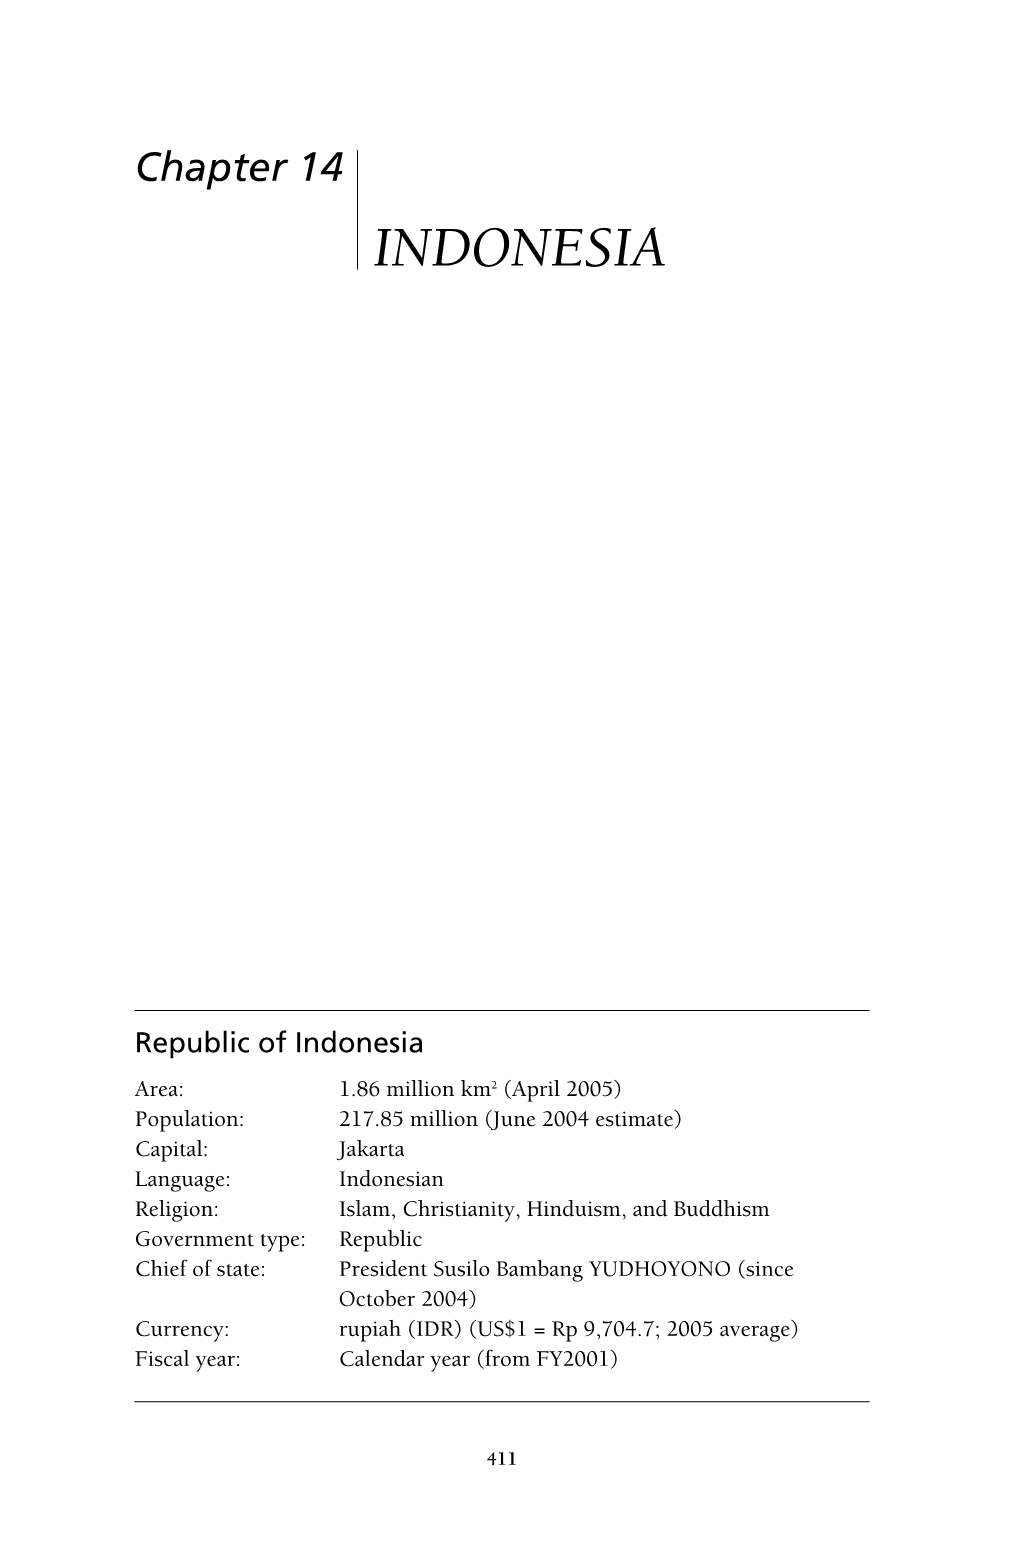 Chapter 14－Indonesia Aceh Peace Accord And